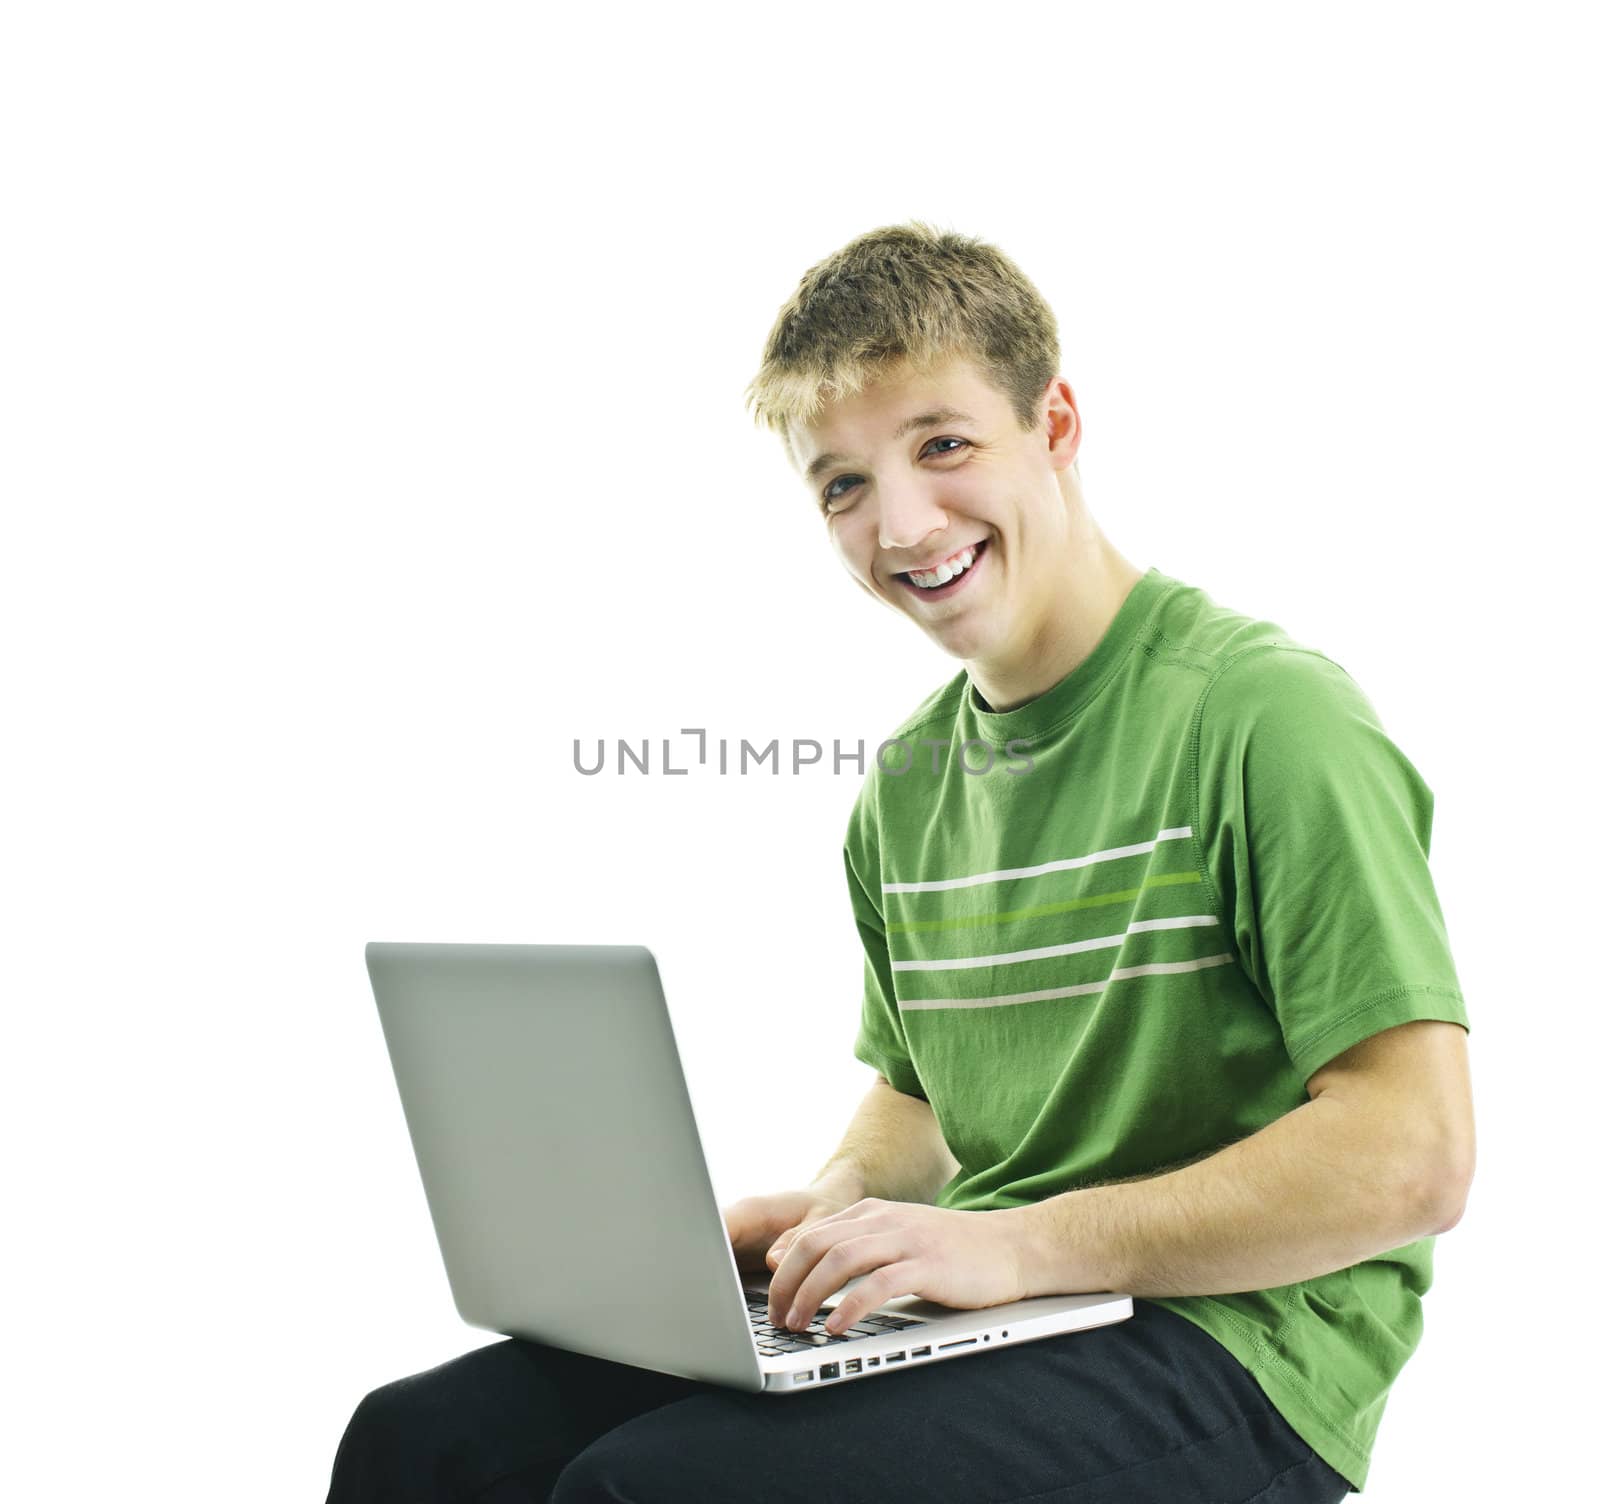 Smiling young man sitting with laptop computer isolated on white background